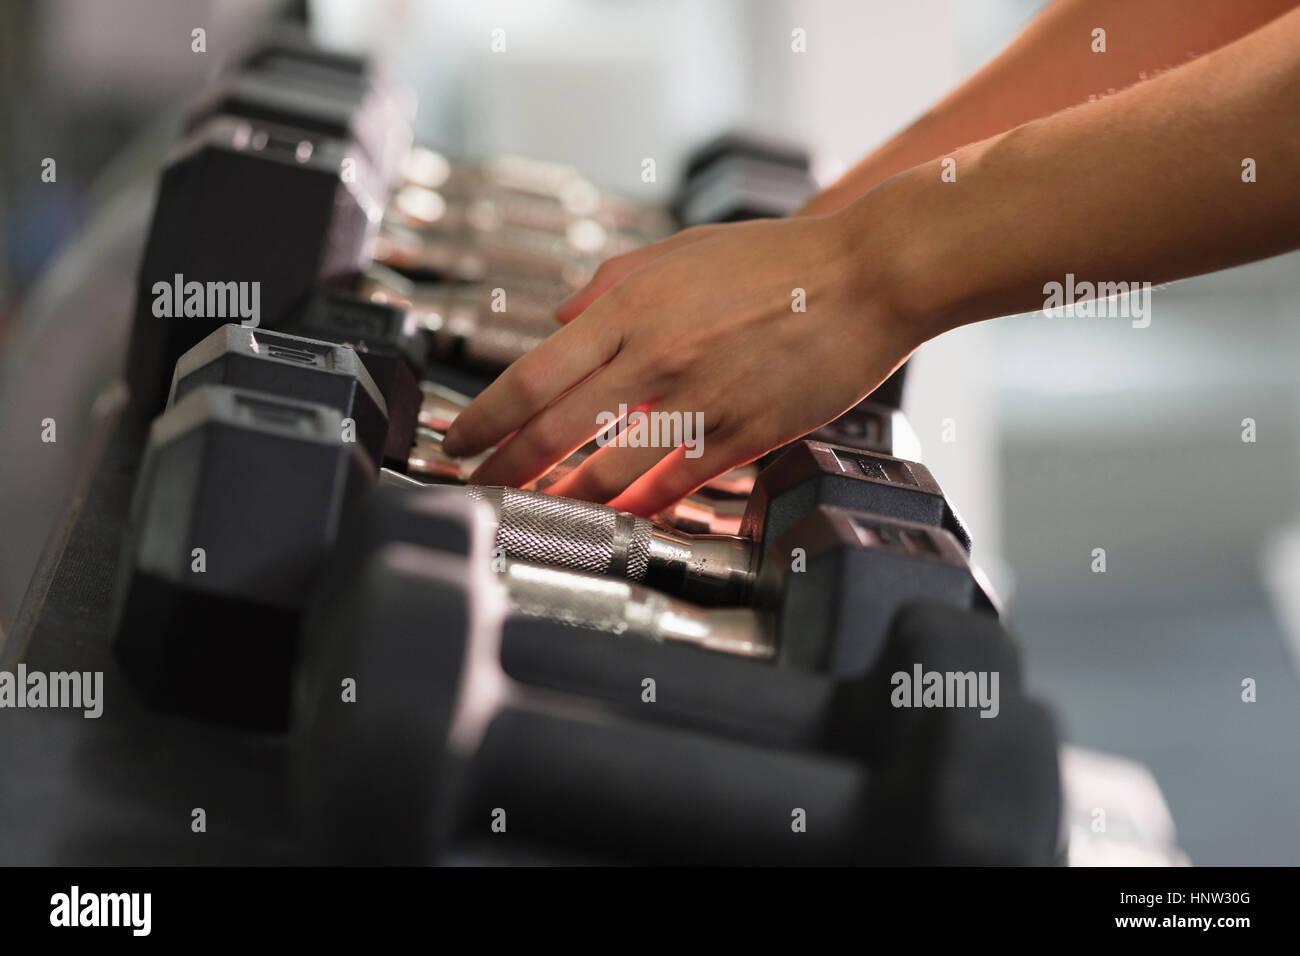 Hands of Mixed Race woman reaching for dumbbells Stock Photo